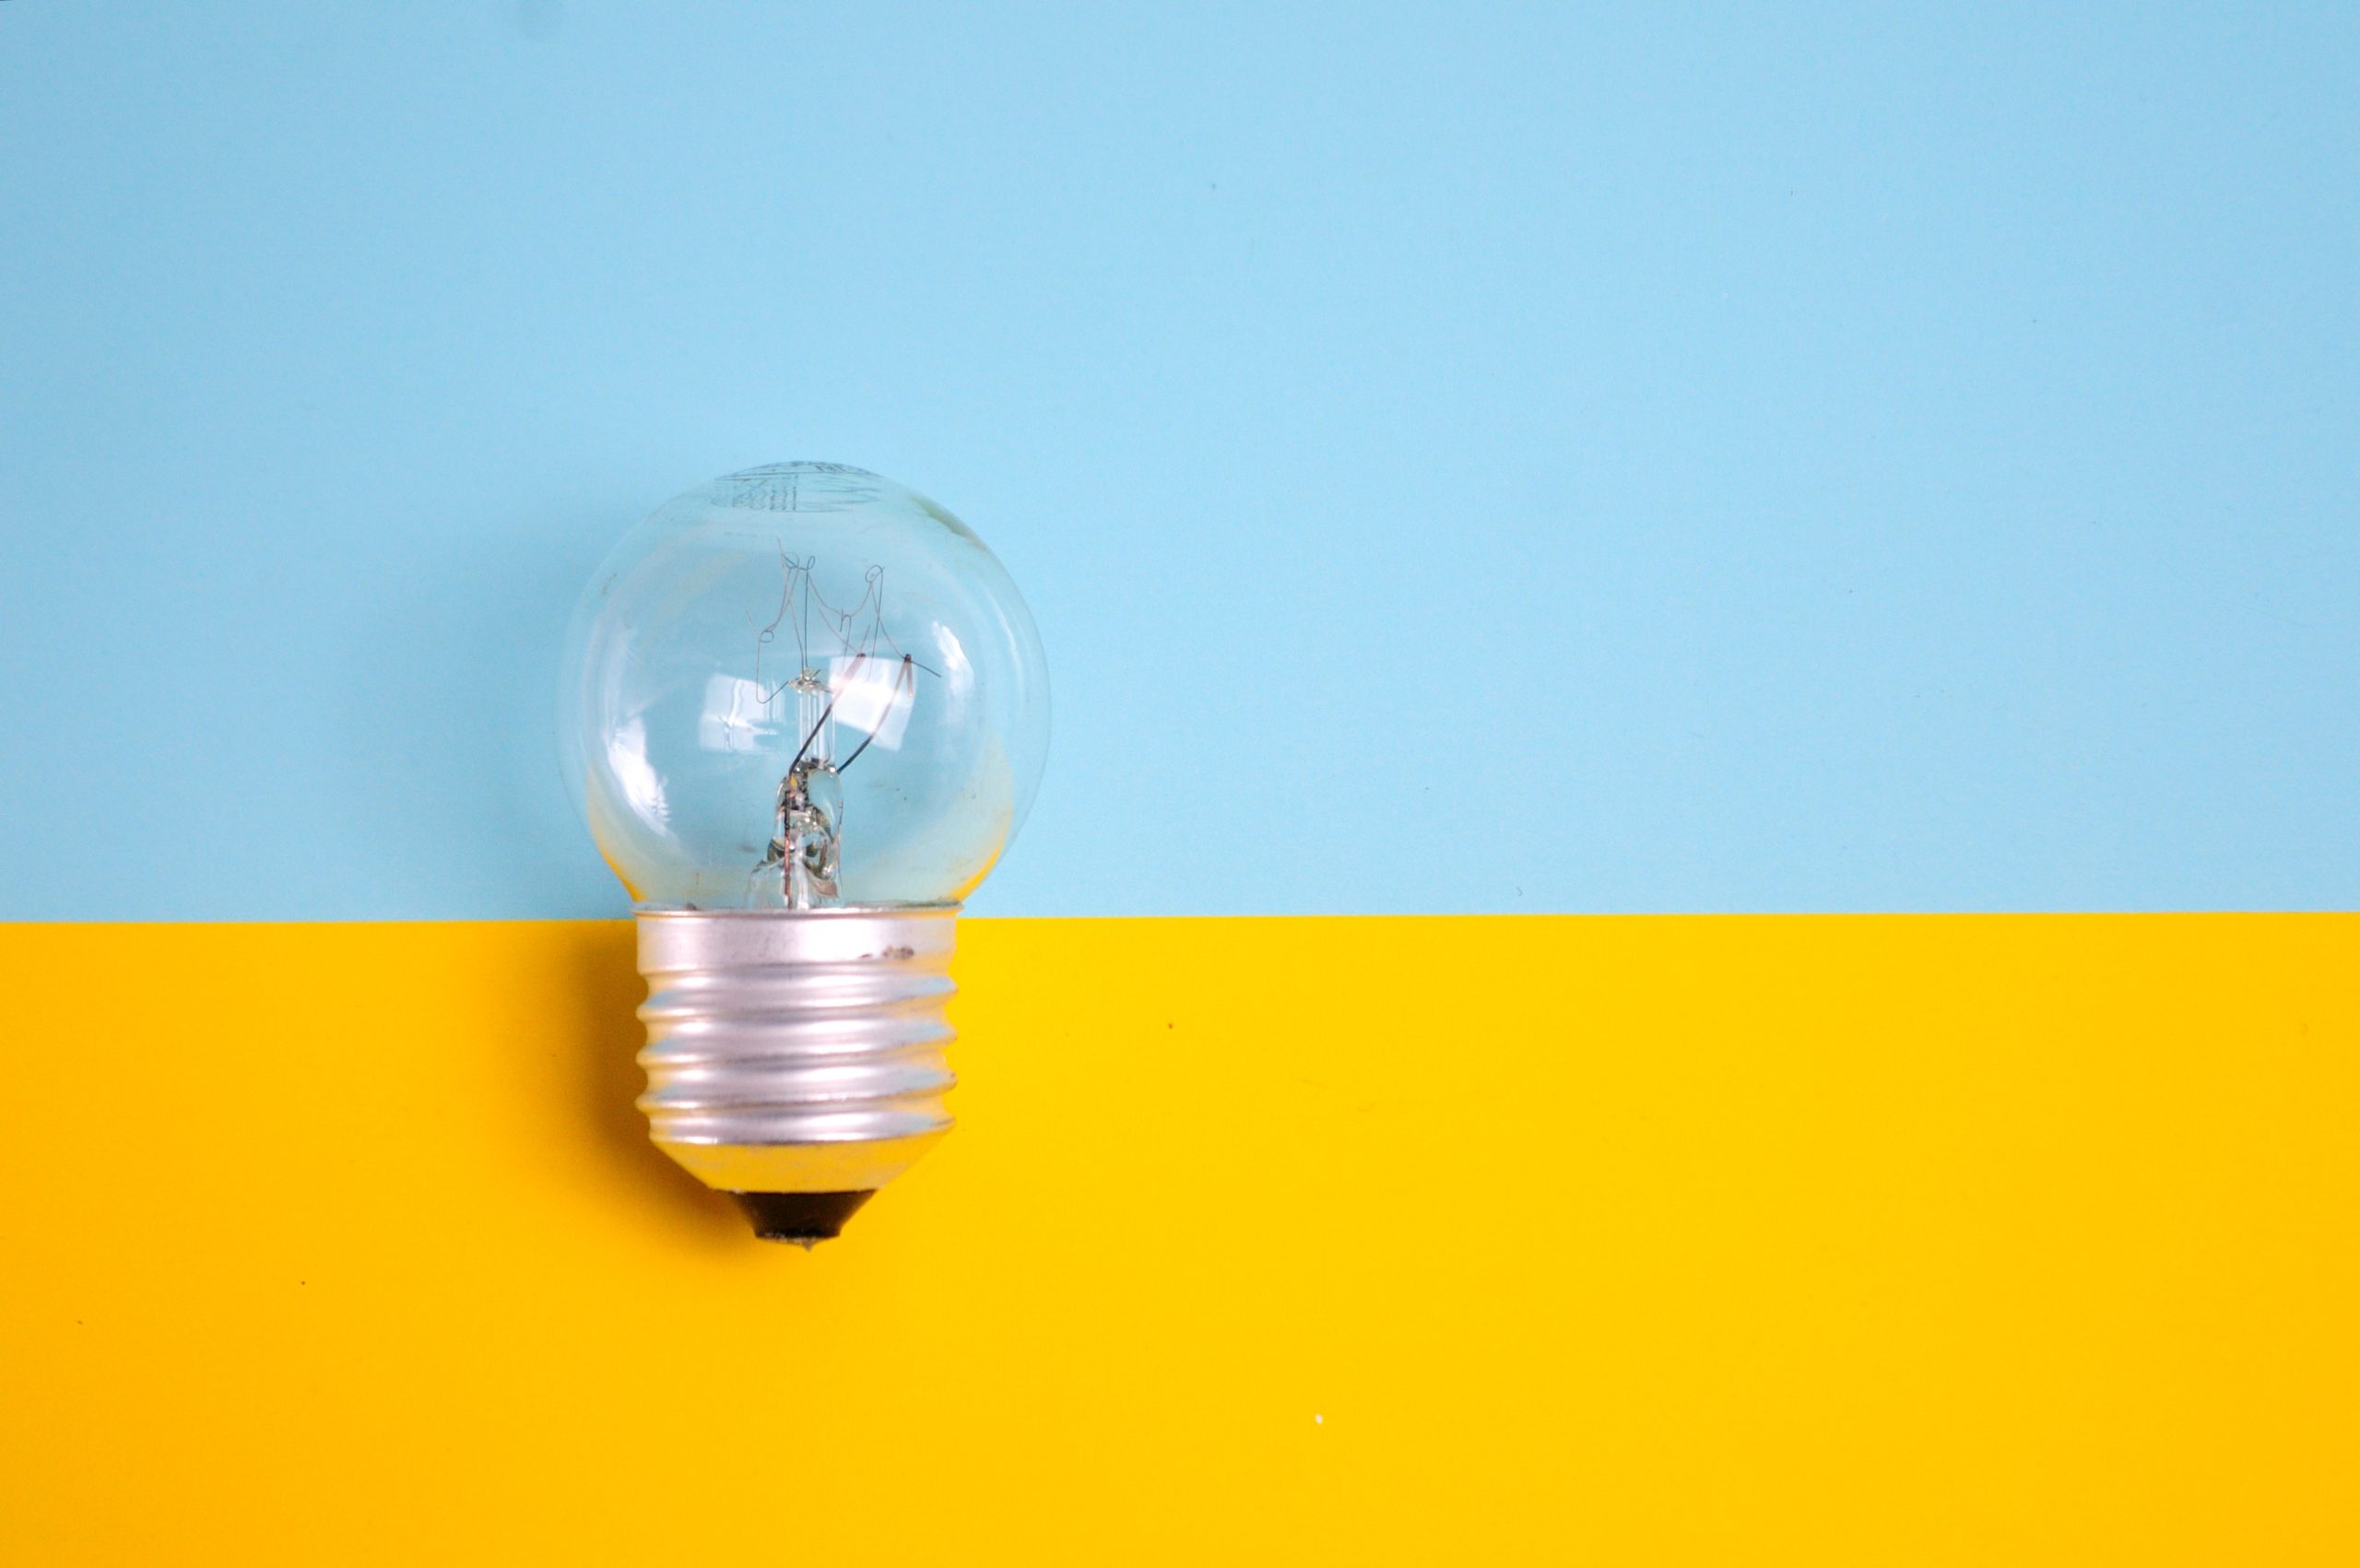 Image of light bulb against a blue and yellow background